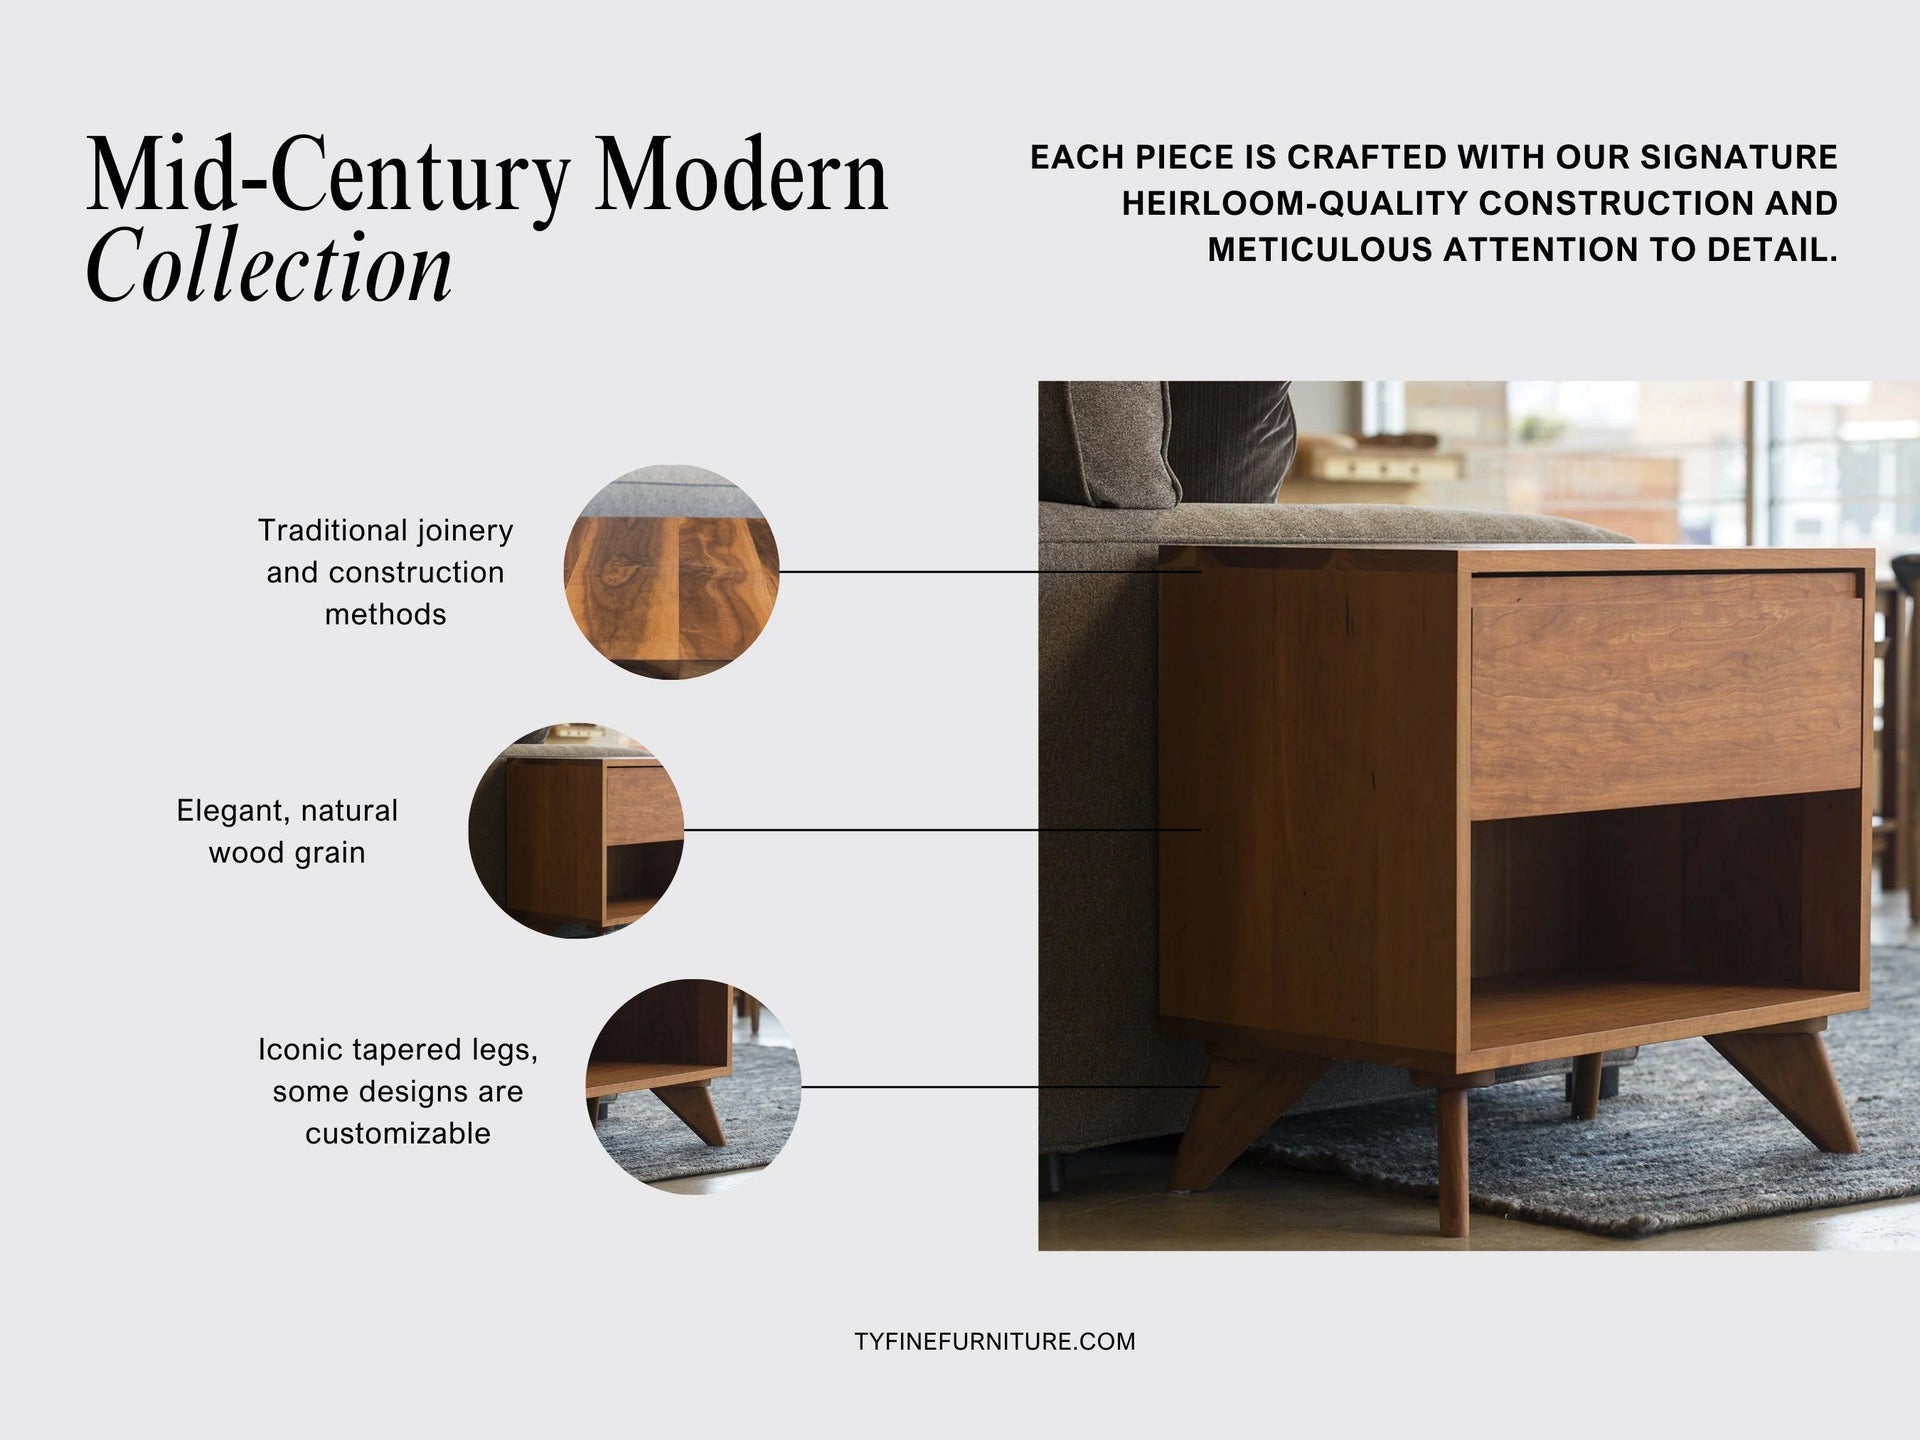 Mid-Century Modern Collection features